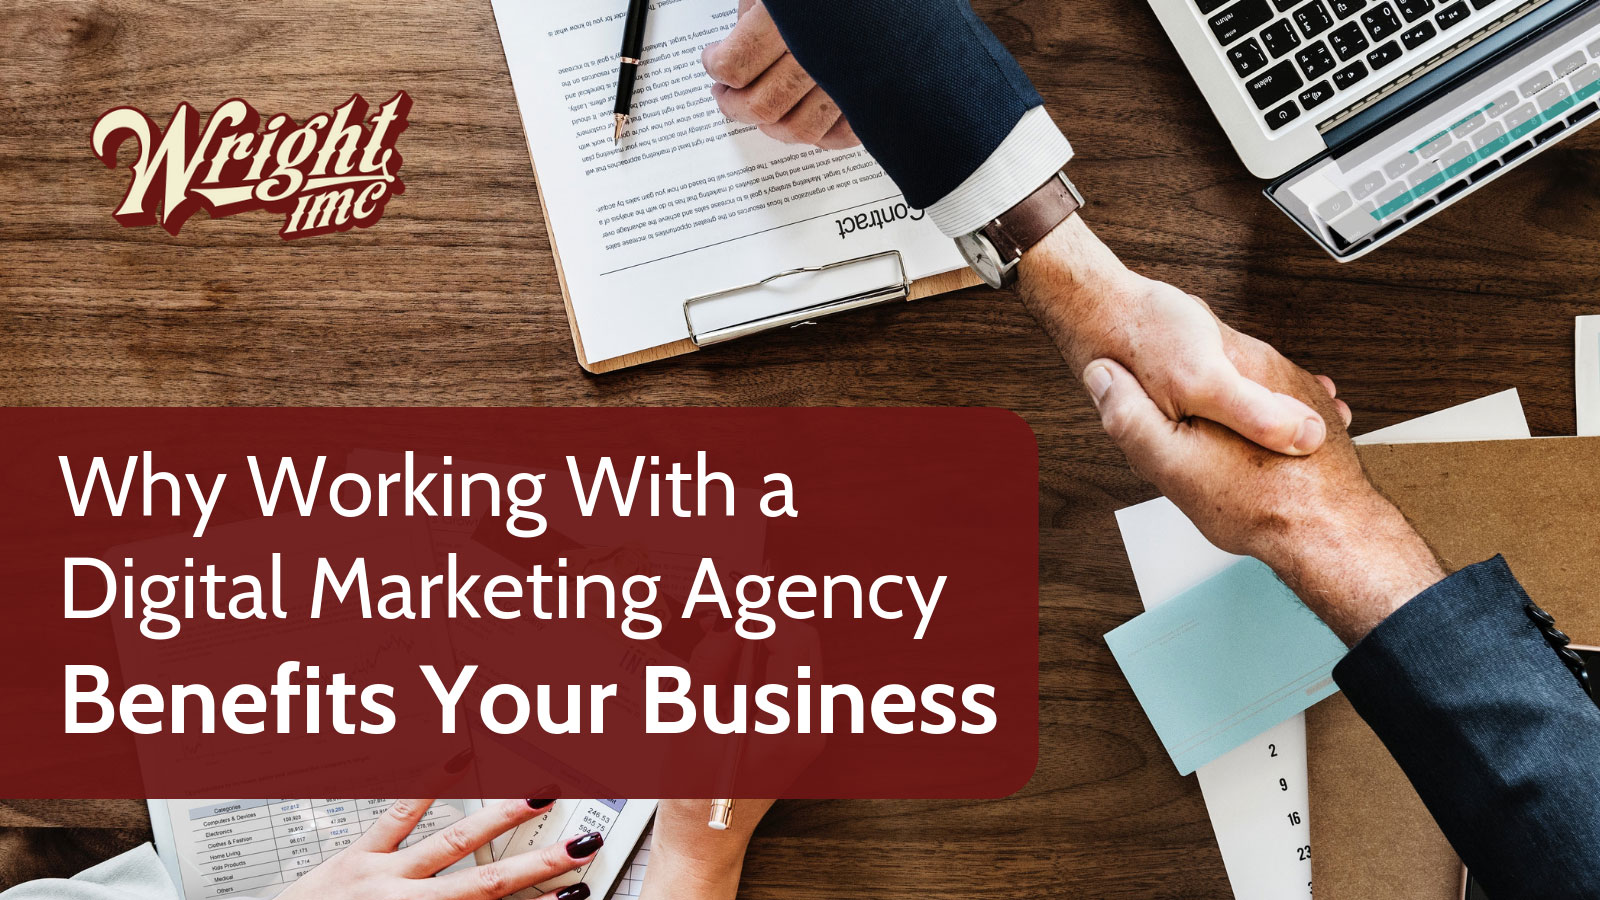 Why Working with a Digital Marketing Agency Benefits Your Business